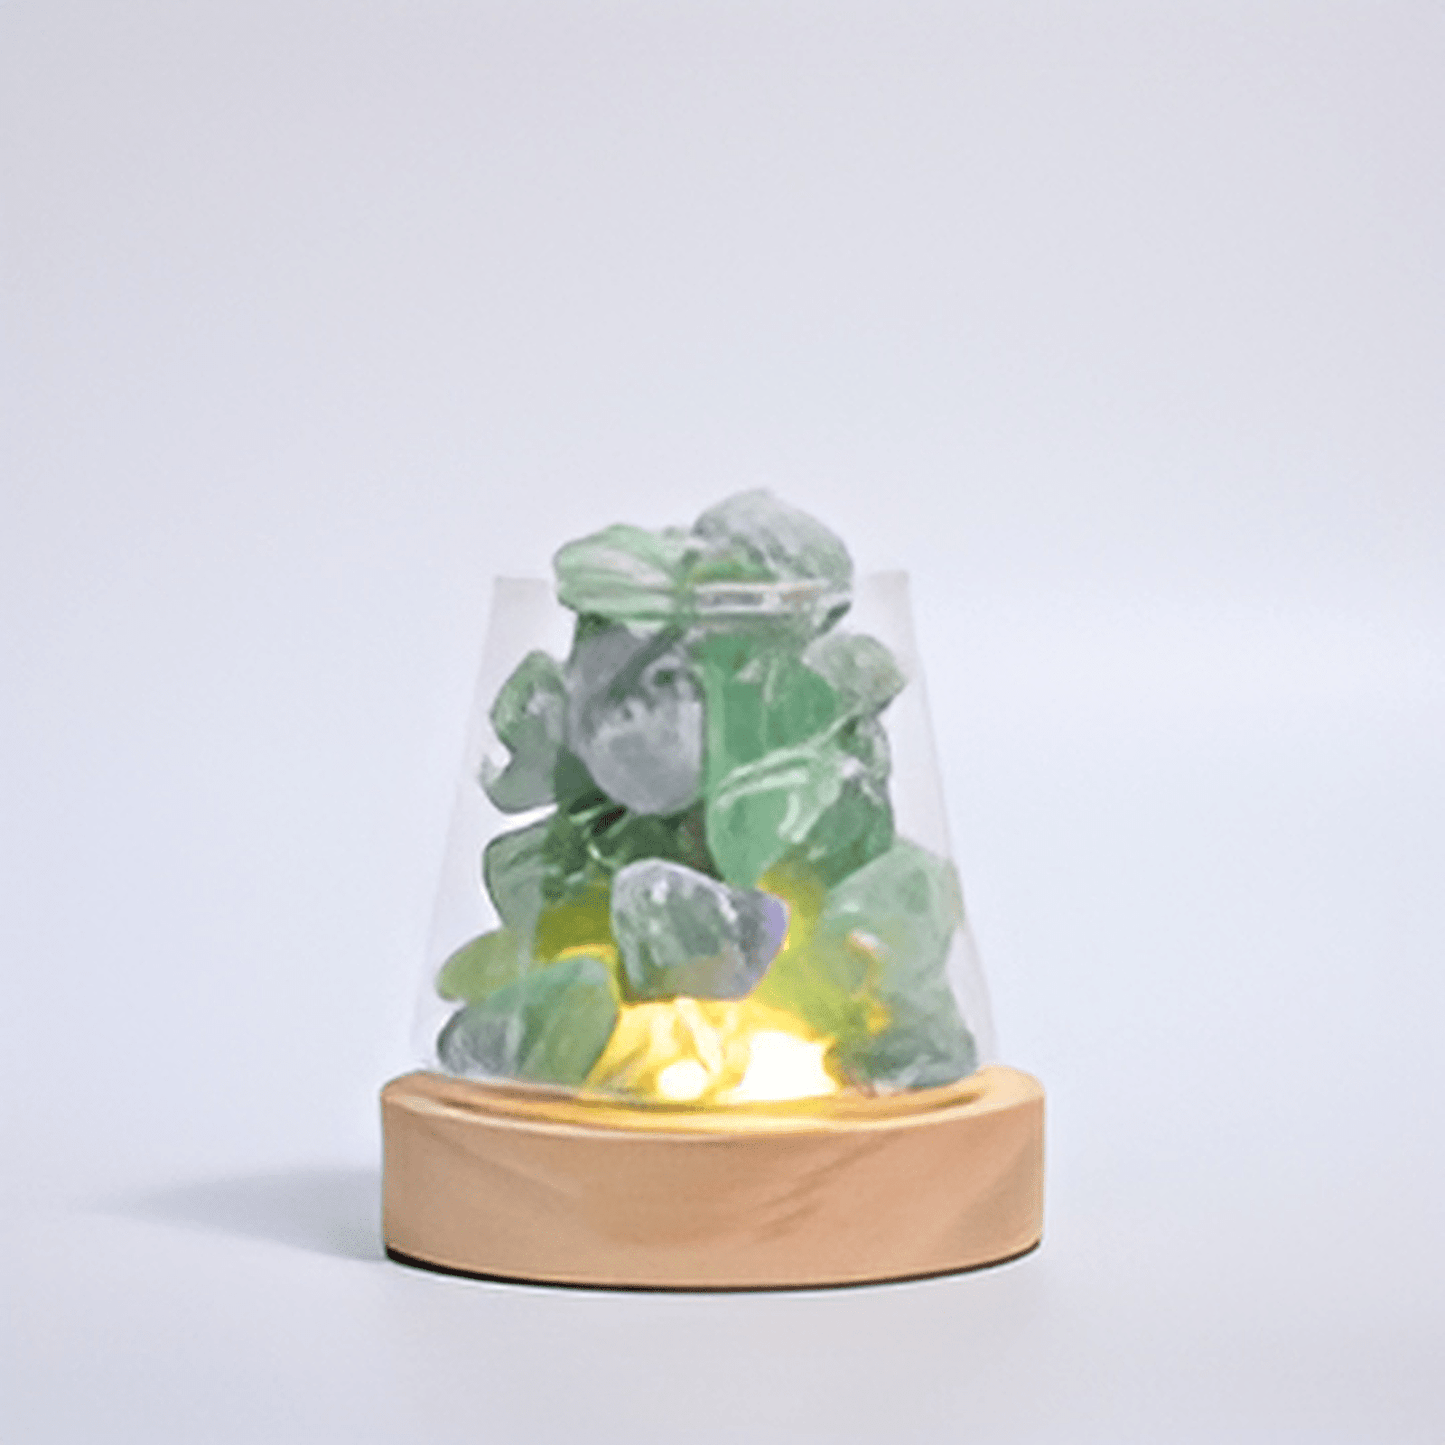 Crystal Healing Green Fluorite Crystal Mindfulness Diffuser